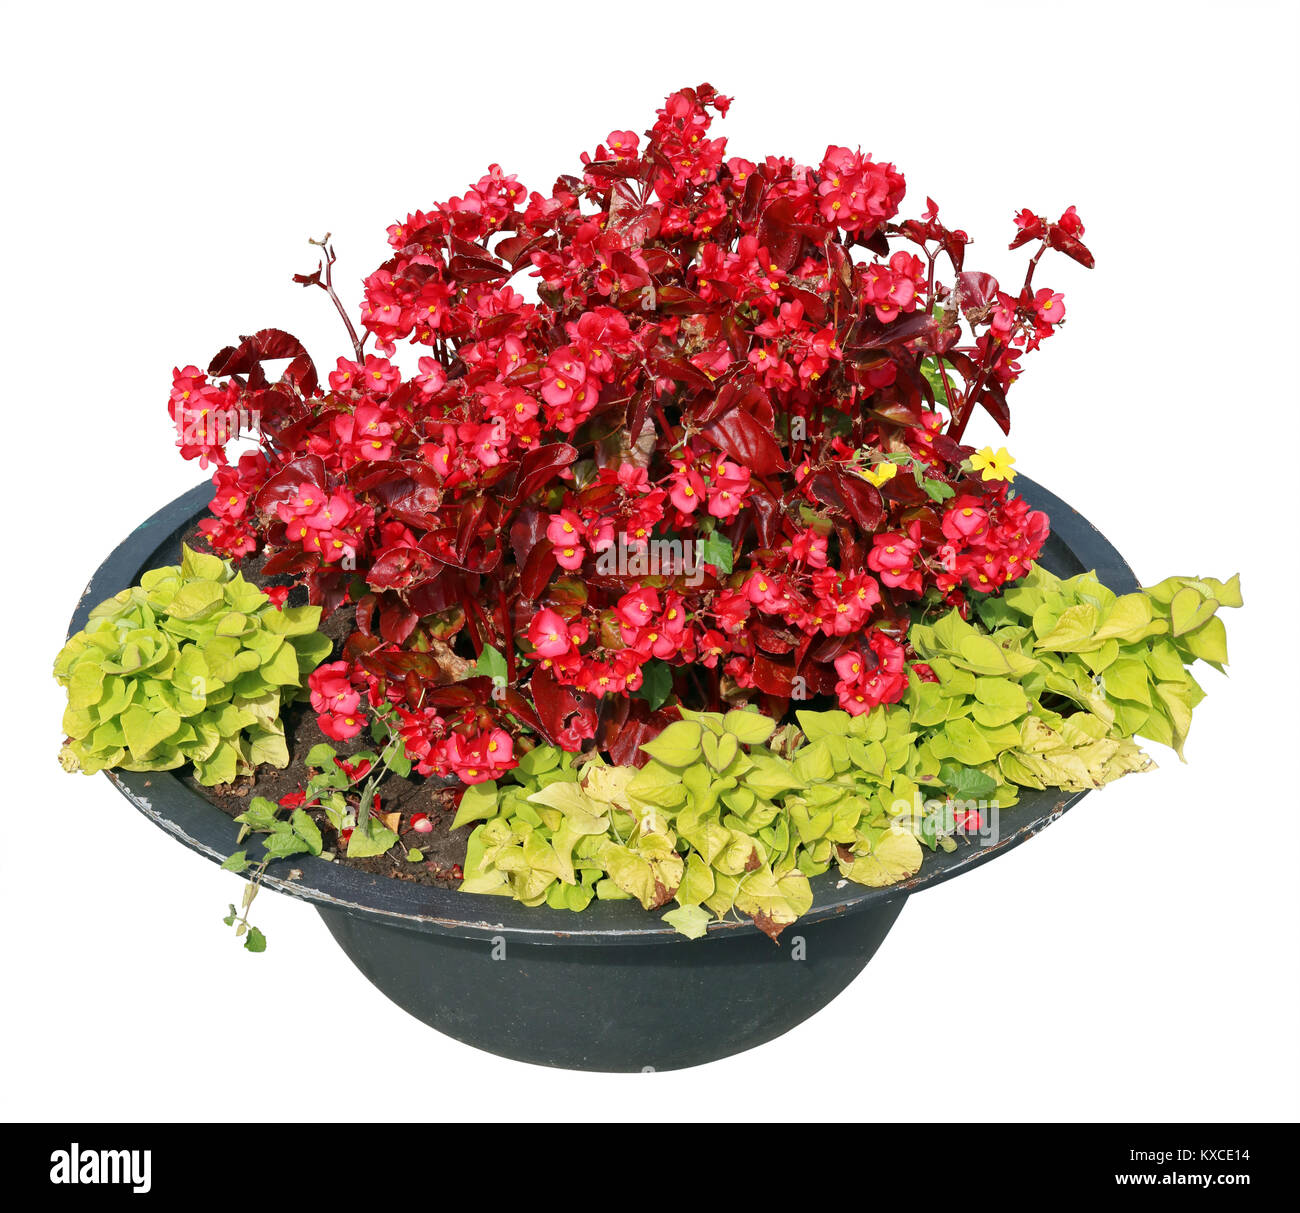 Shrubs of withering red begonias grow in a steel vase on a city summer street. Isolated on white outdoor shot Stock Photo